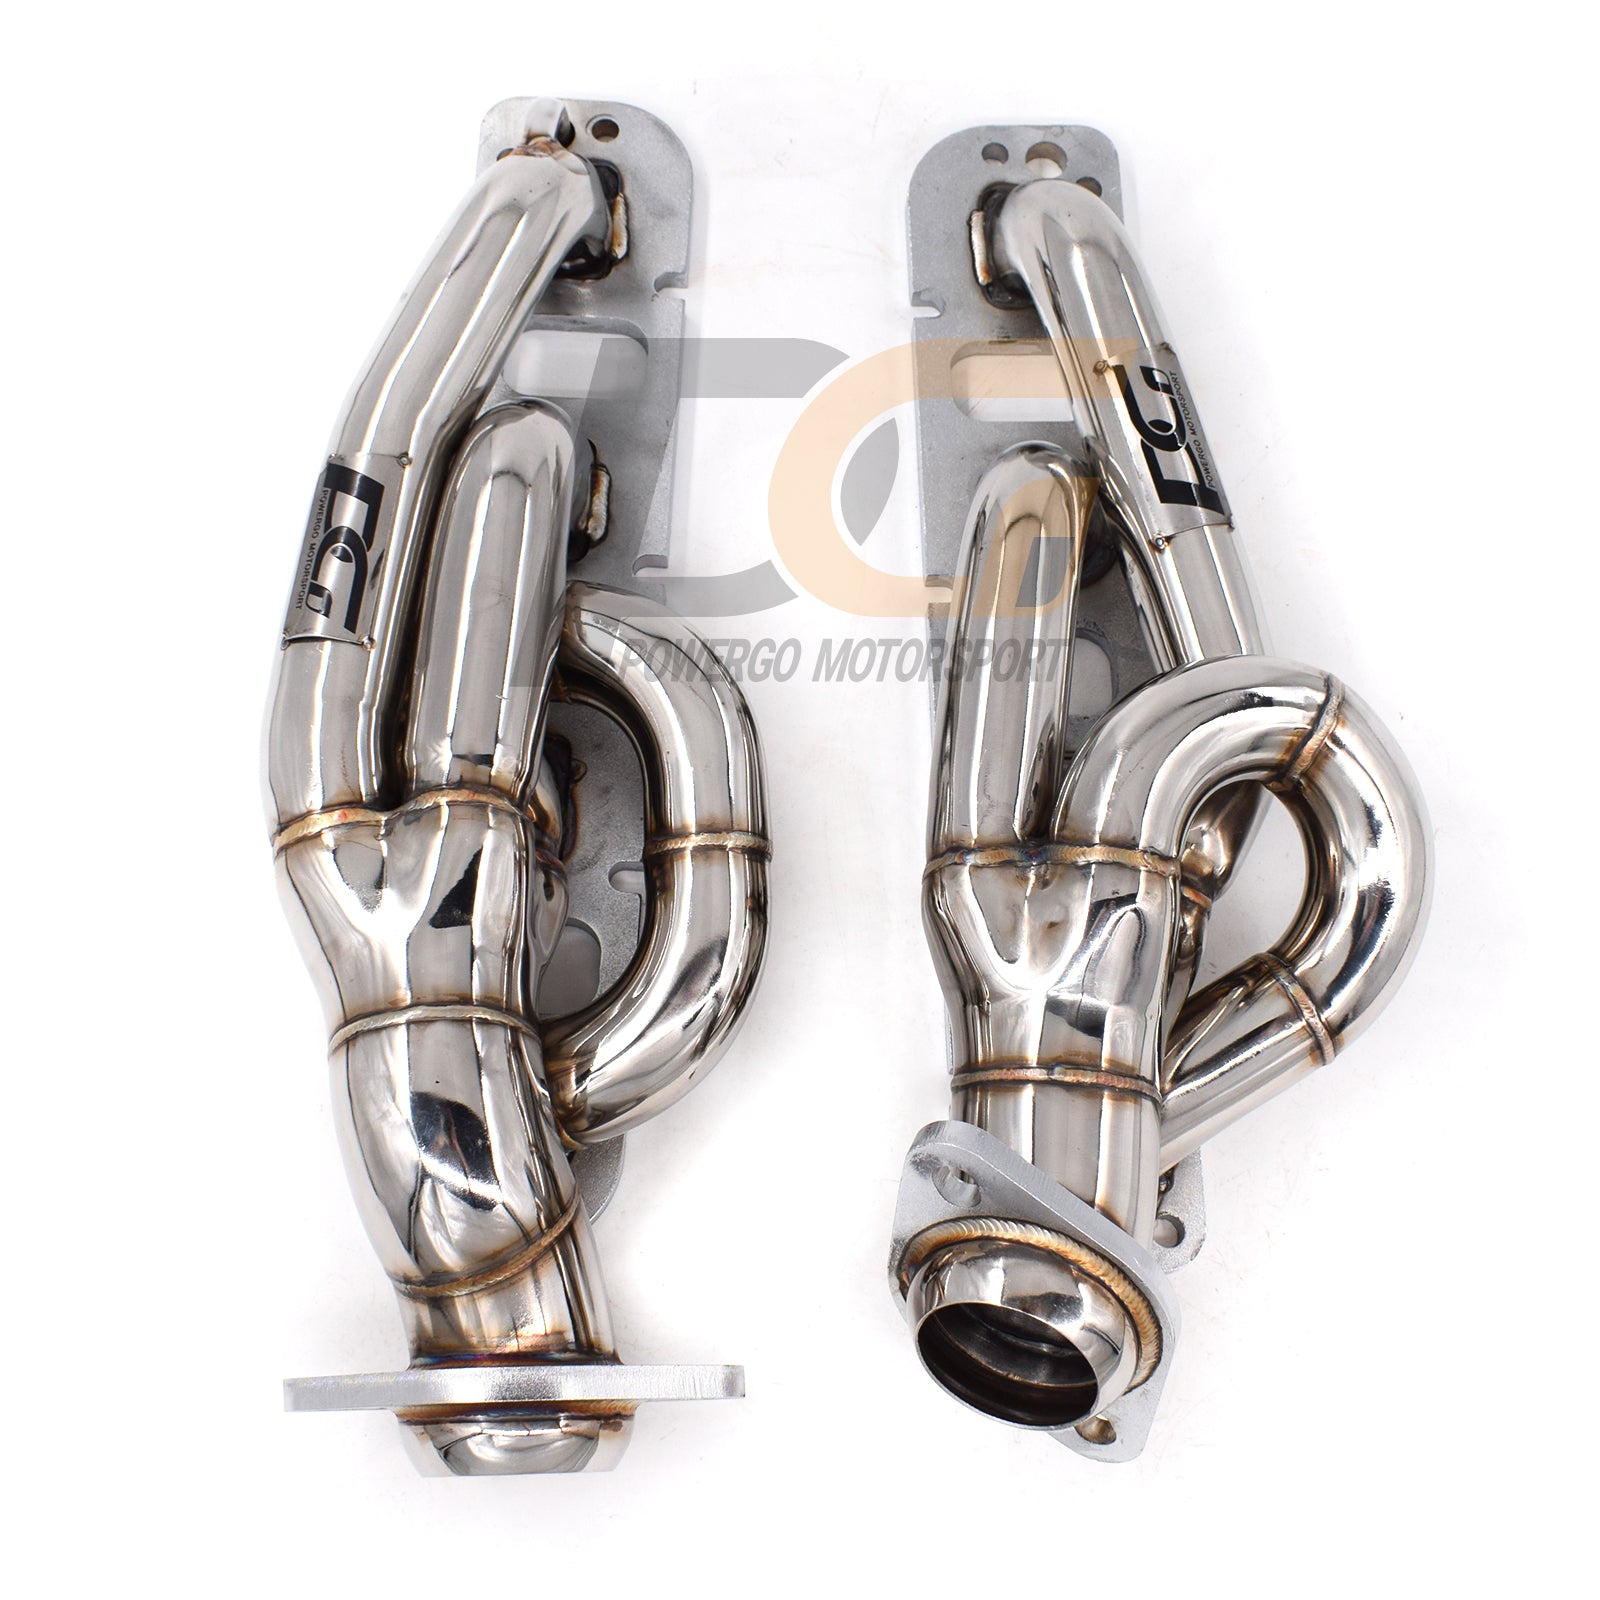 POWERGO MOTORSPORT 1153323859 1-7/8 x 2-1/2 inches 409 Stainless Steel Shorty Headers Natural Finish 